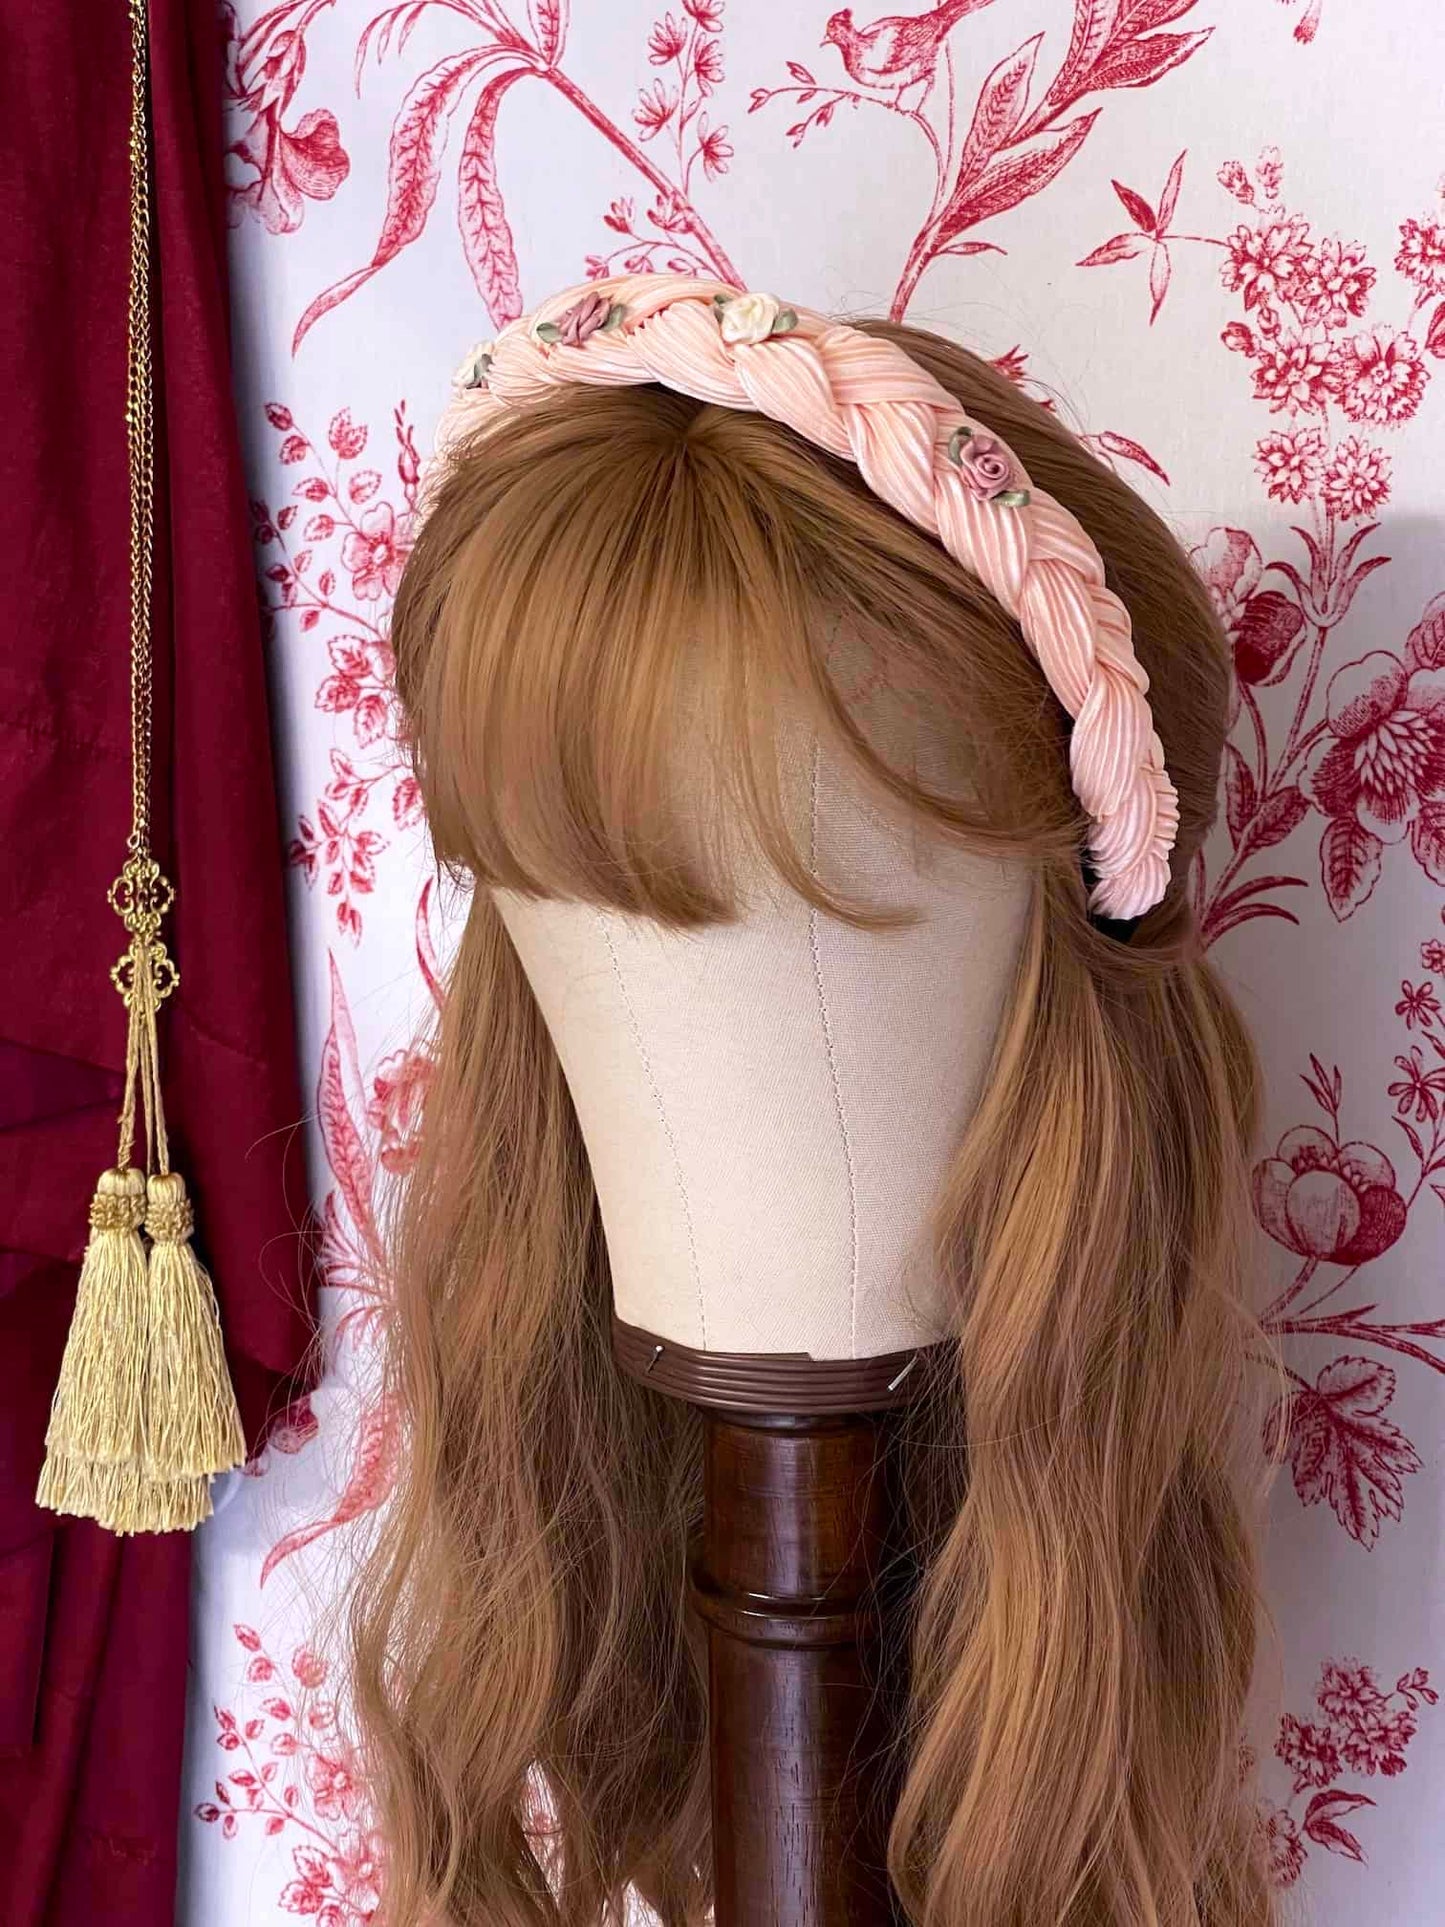 A Historically Inspired Braided Chiffon Rosette Headband in Ballerina Pink, perfect for rococo and regency era fashion.